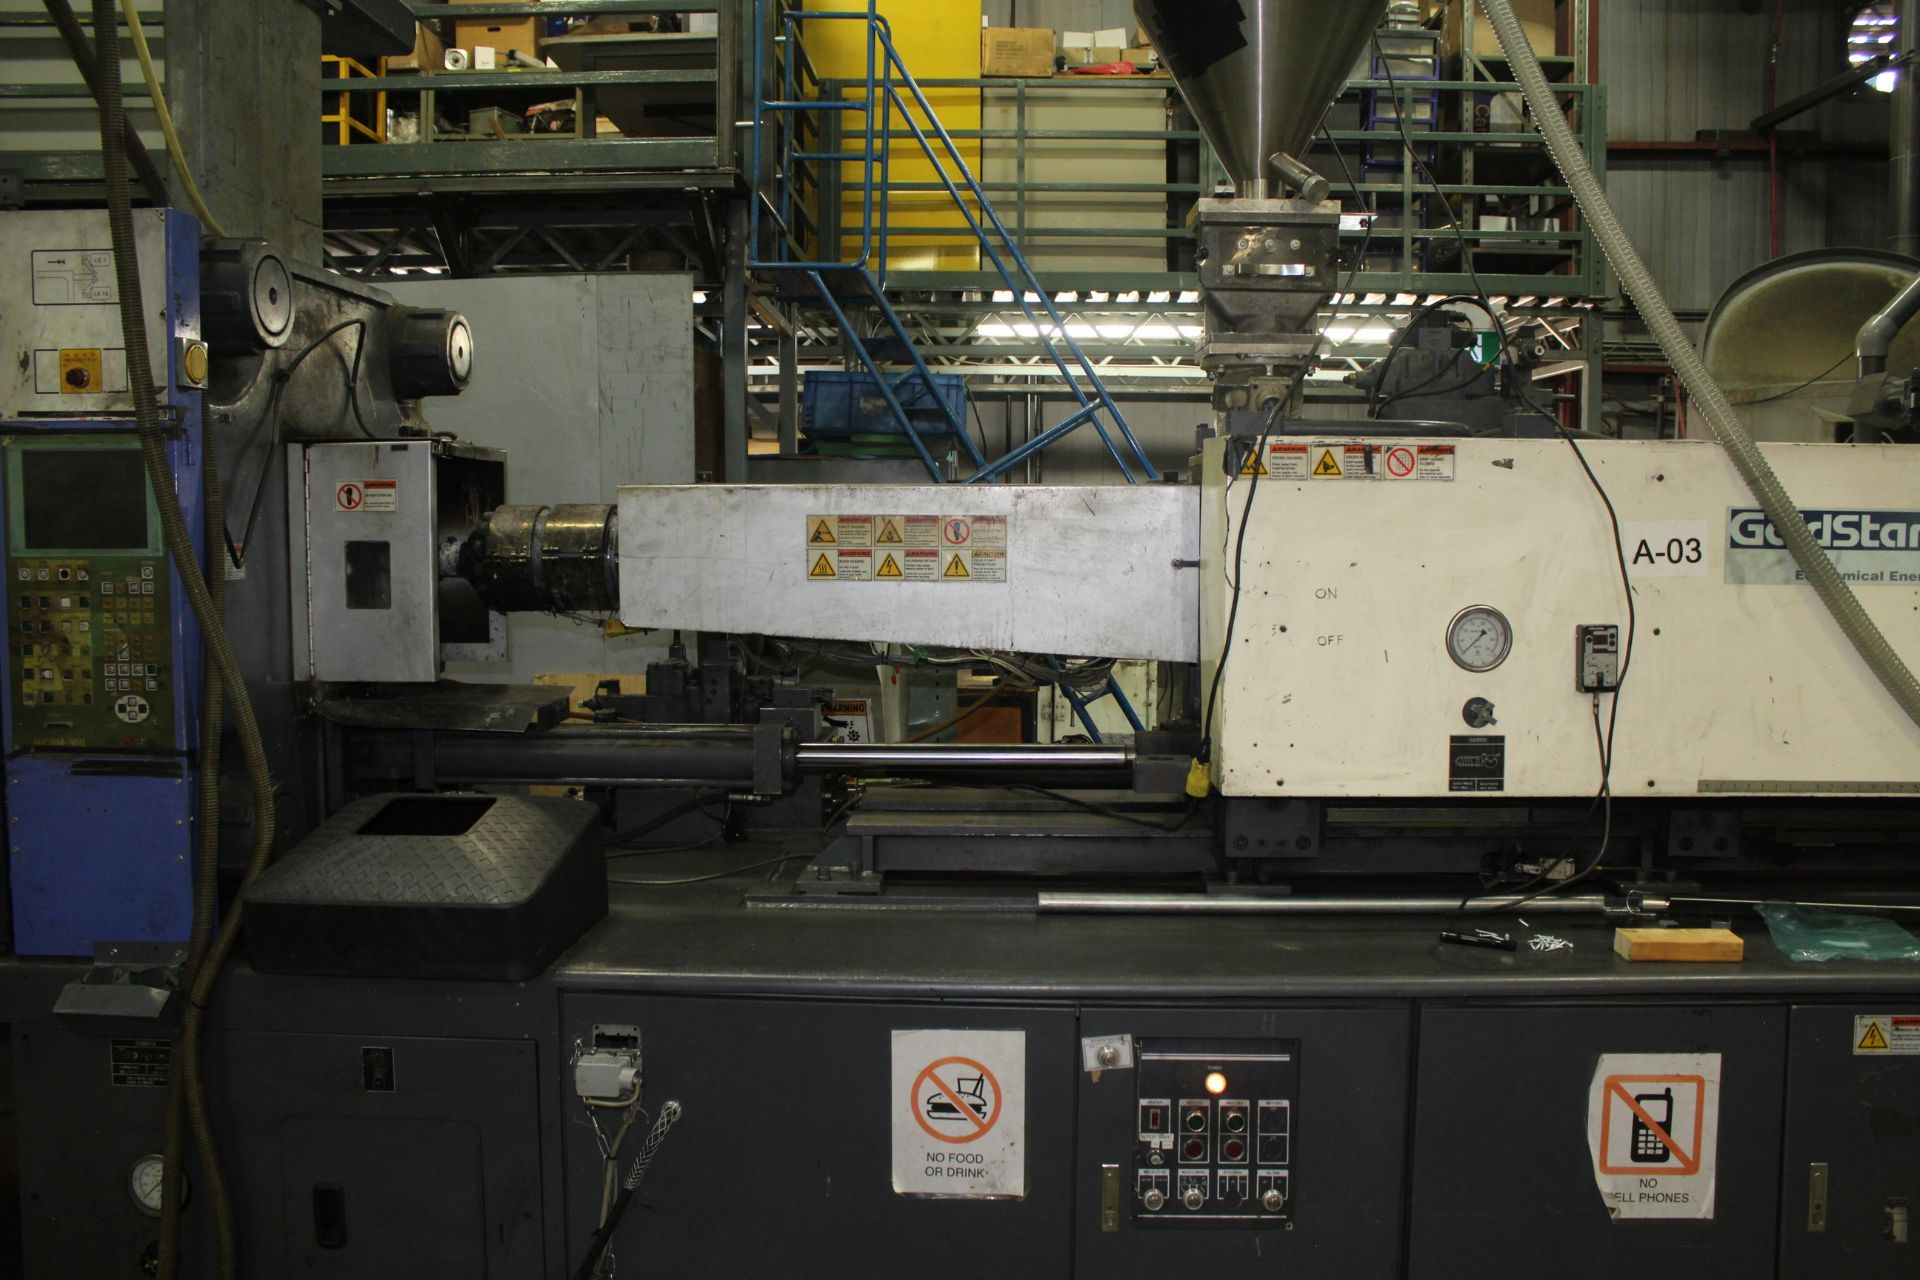 LG GOLD STAR 500H INJECTION MOLDER, 500-TON CAP. - Image 20 of 38